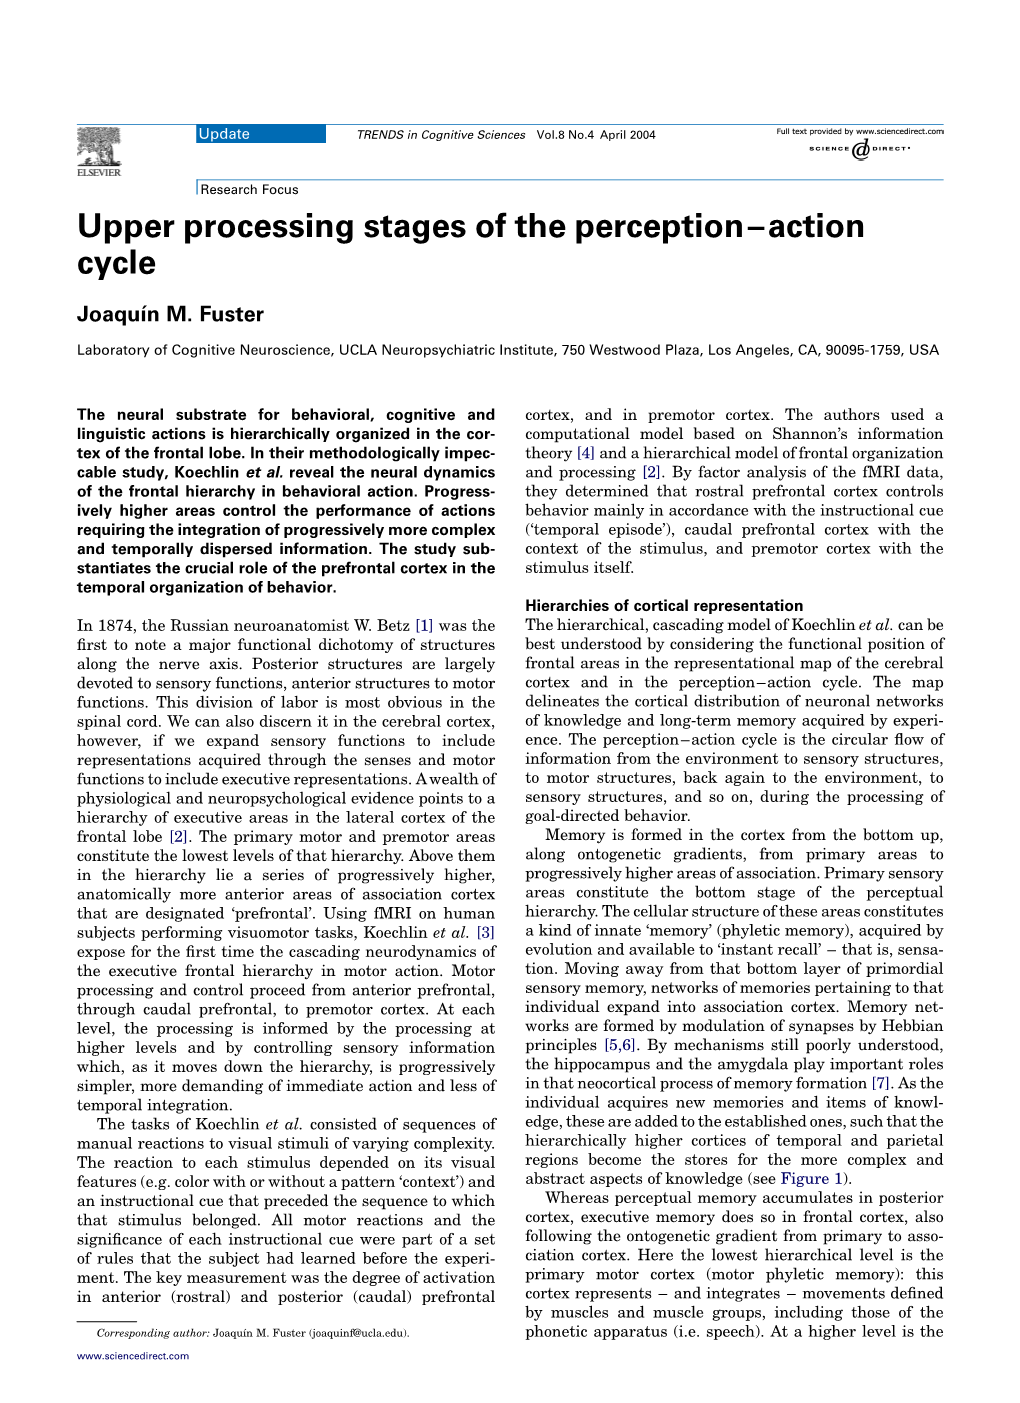 Upper Processing Stages of the Perception–Action Cycle